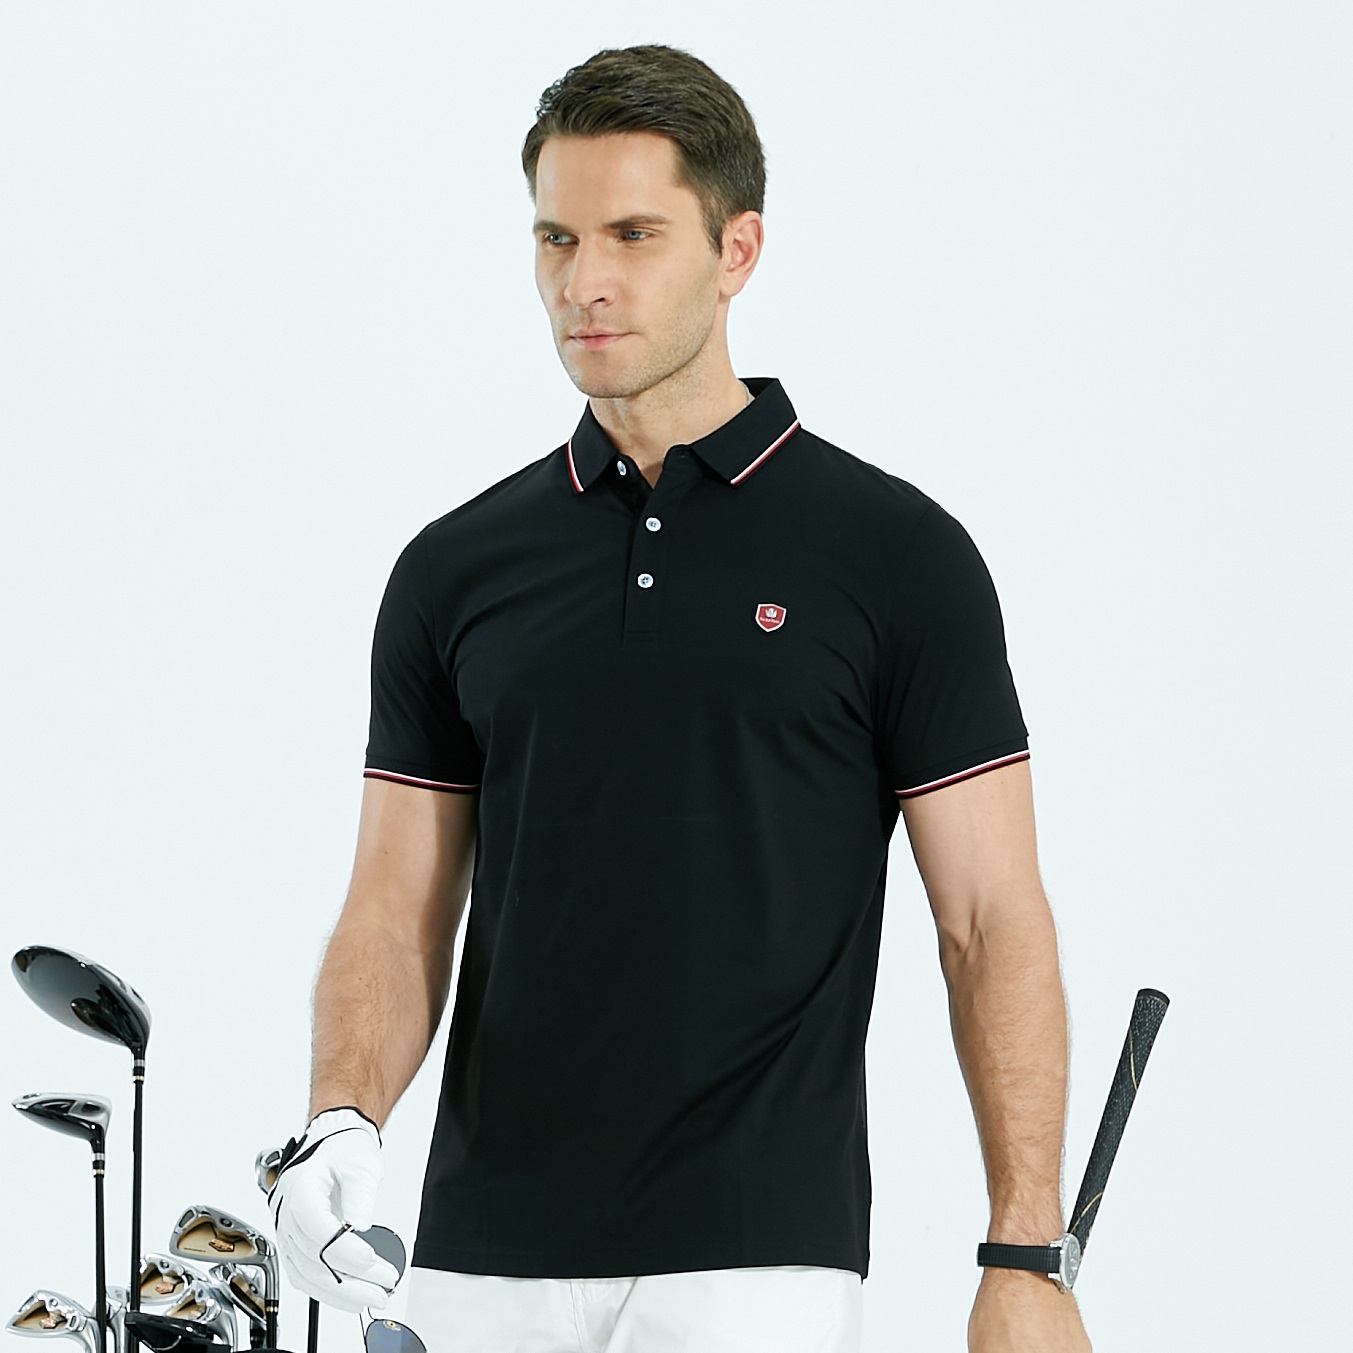 Pique Polo tshirts 100% Cotton plus size short sleeve Men's Golf polo shirts Custom logo with your embroidered Men's polo shirts